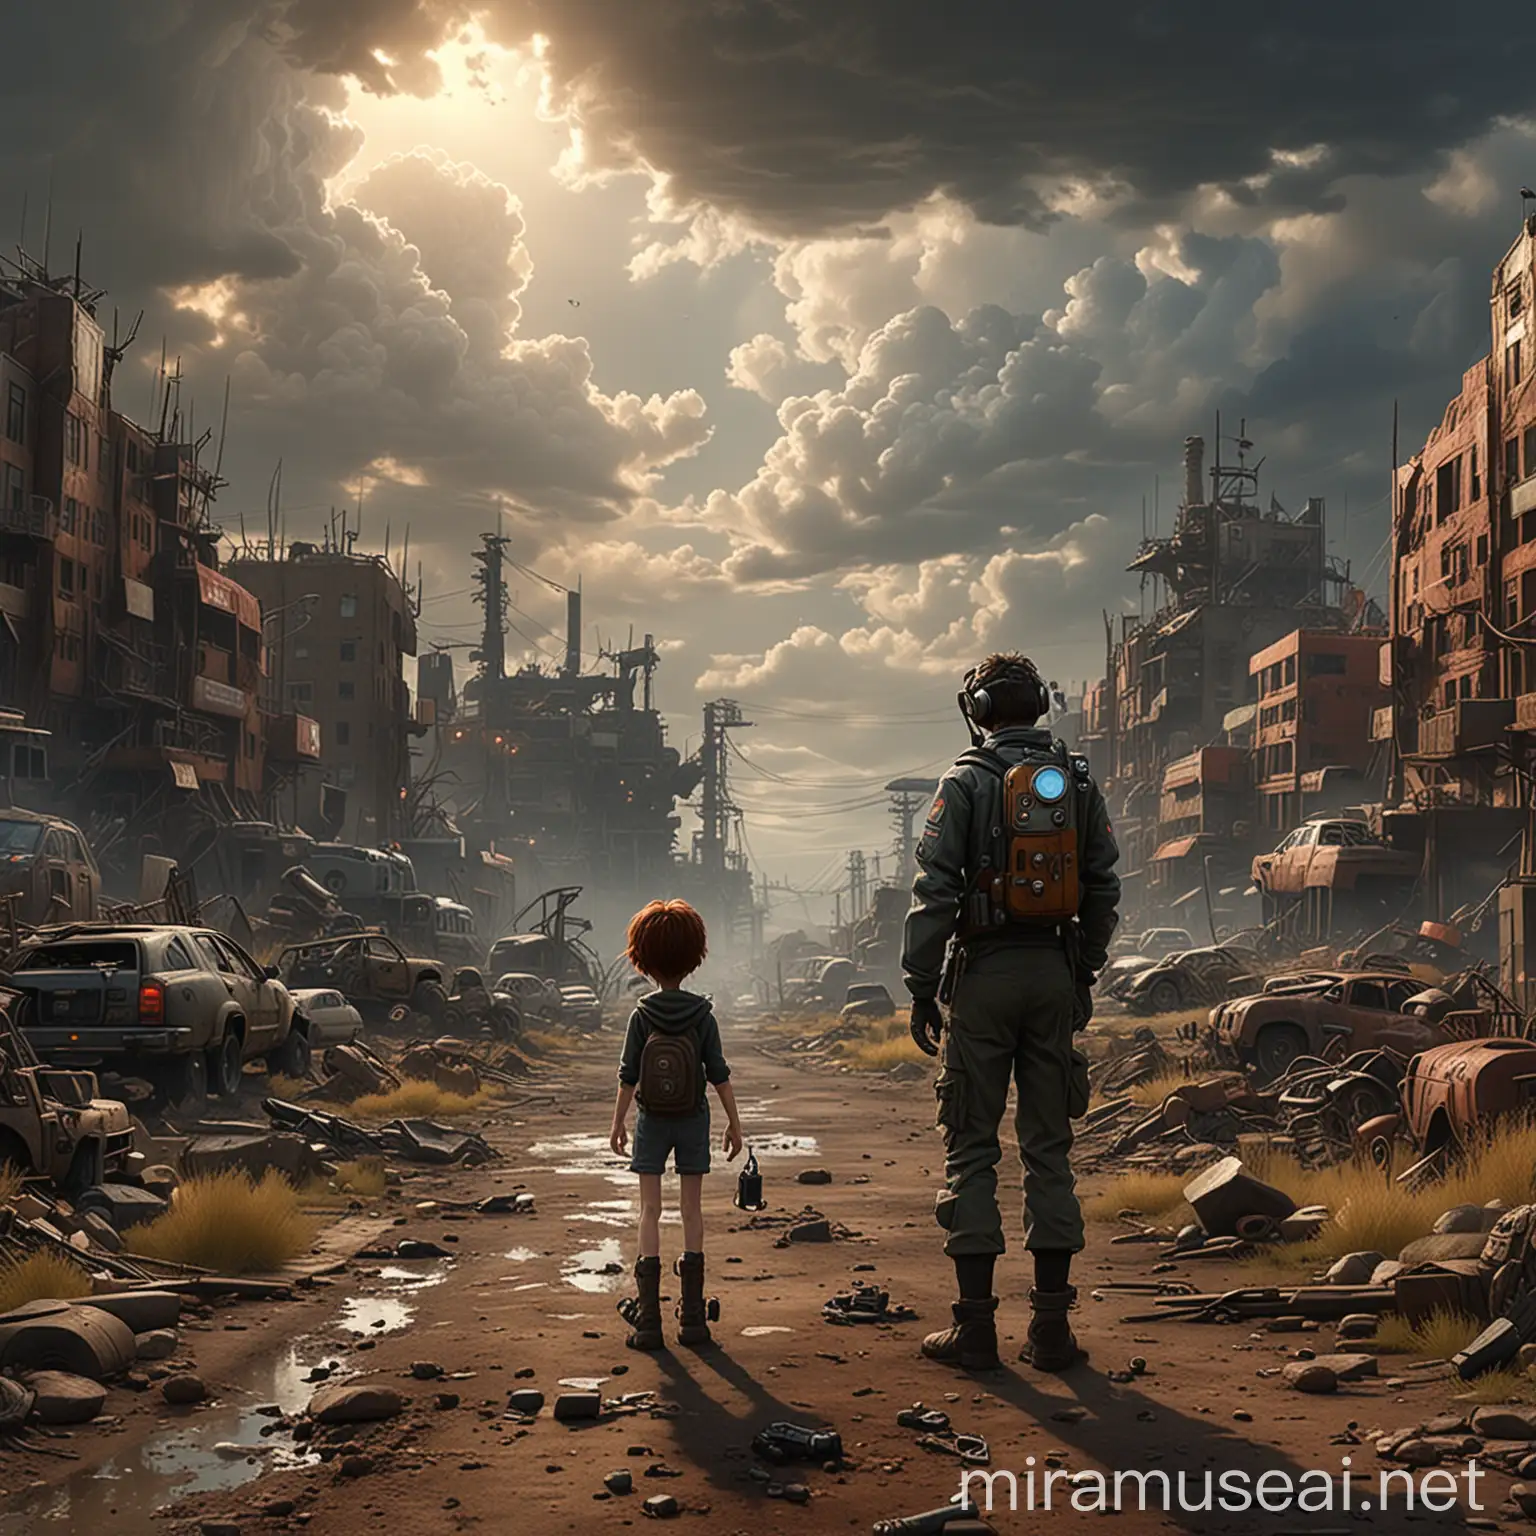 HyperRealistic Pixar Characters in Apocalyptic Techno Landscape